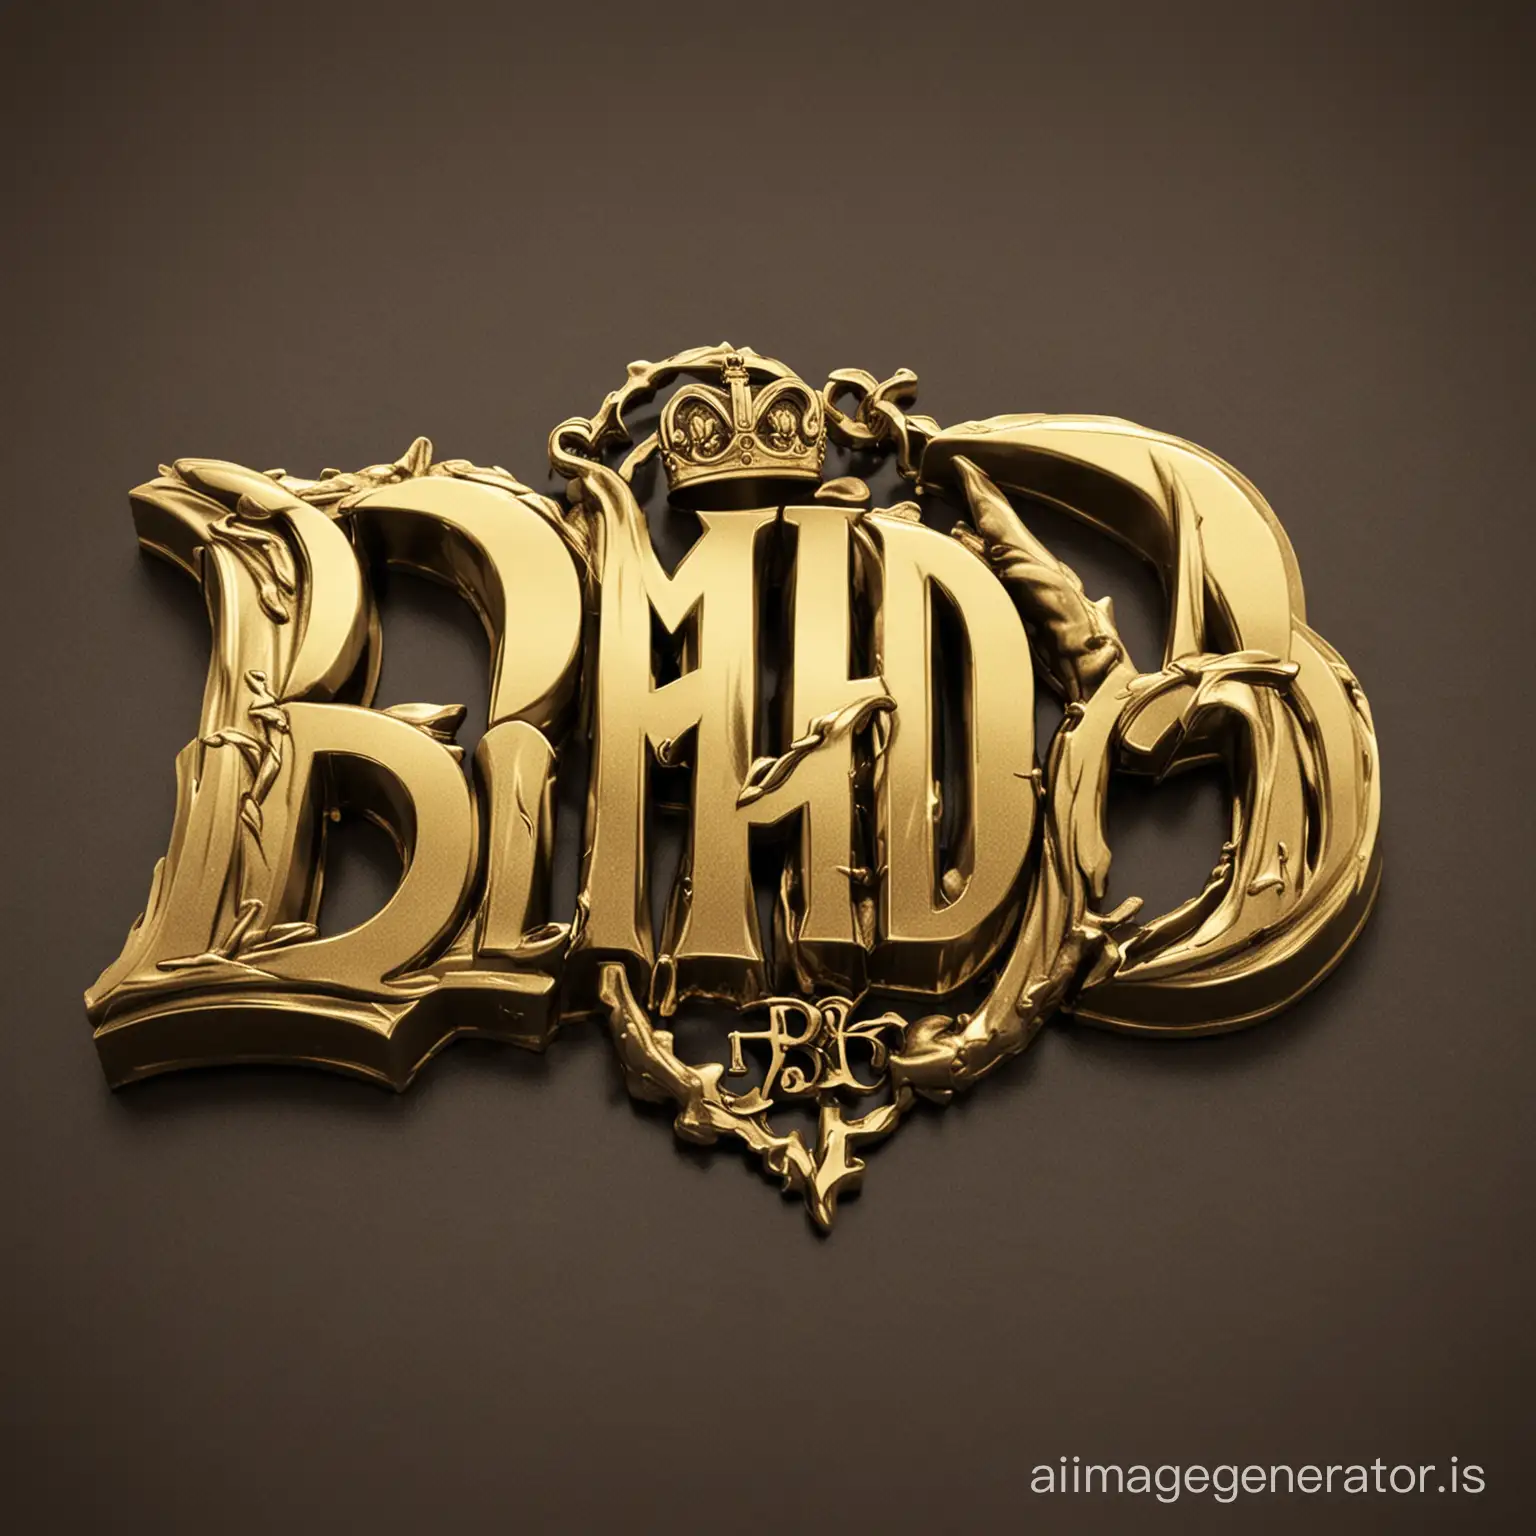 Luxurious-3D-Gold-Metallic-Logo-for-B-Murda-A-Fusion-of-Gang-Culture-and-Elegance